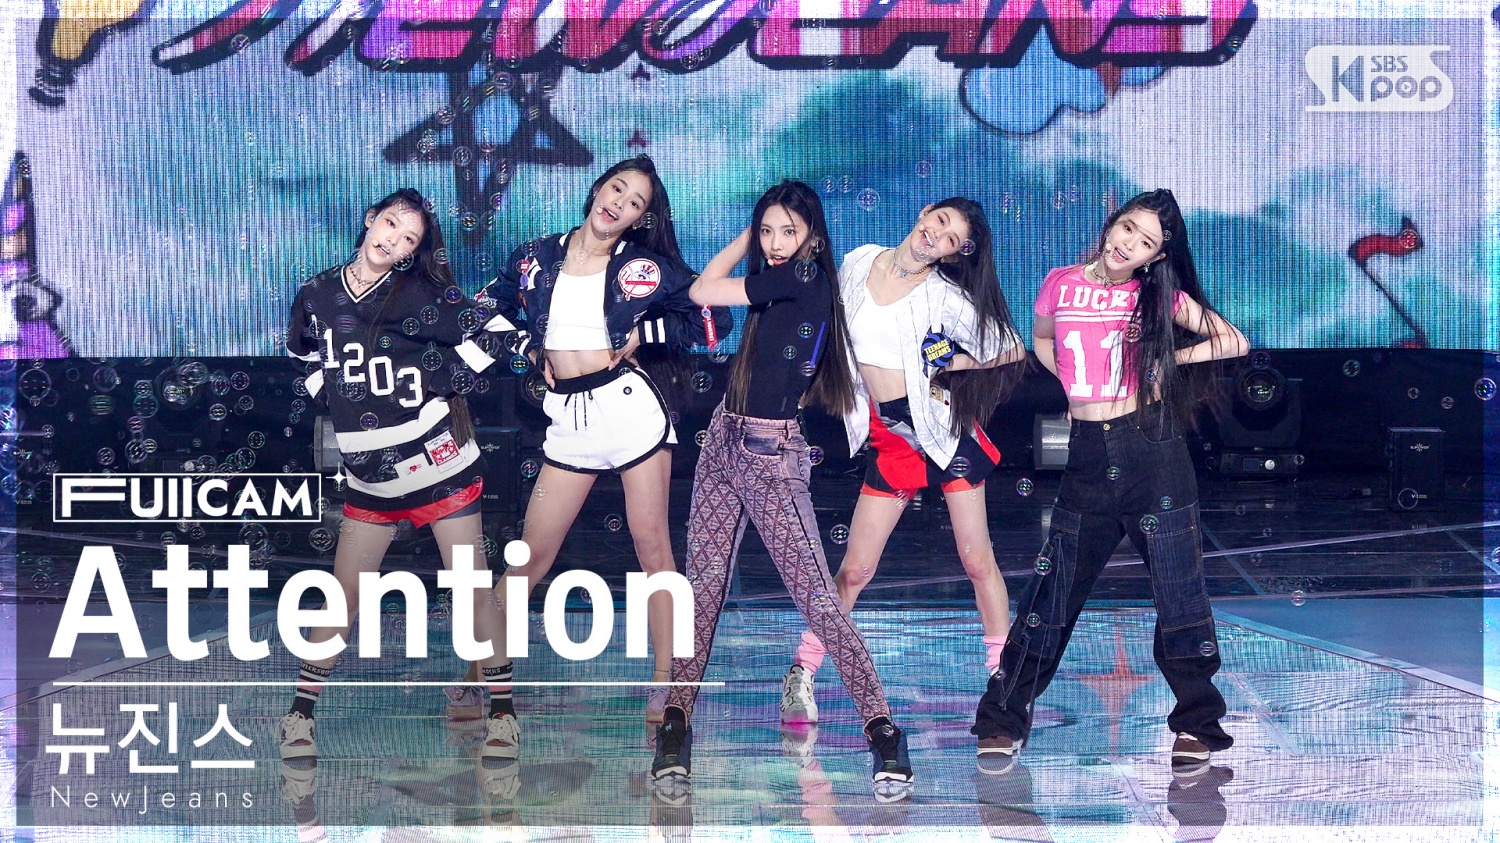 NewJeans succeeds in triple title strategy… 'Attention' music chart all-kill